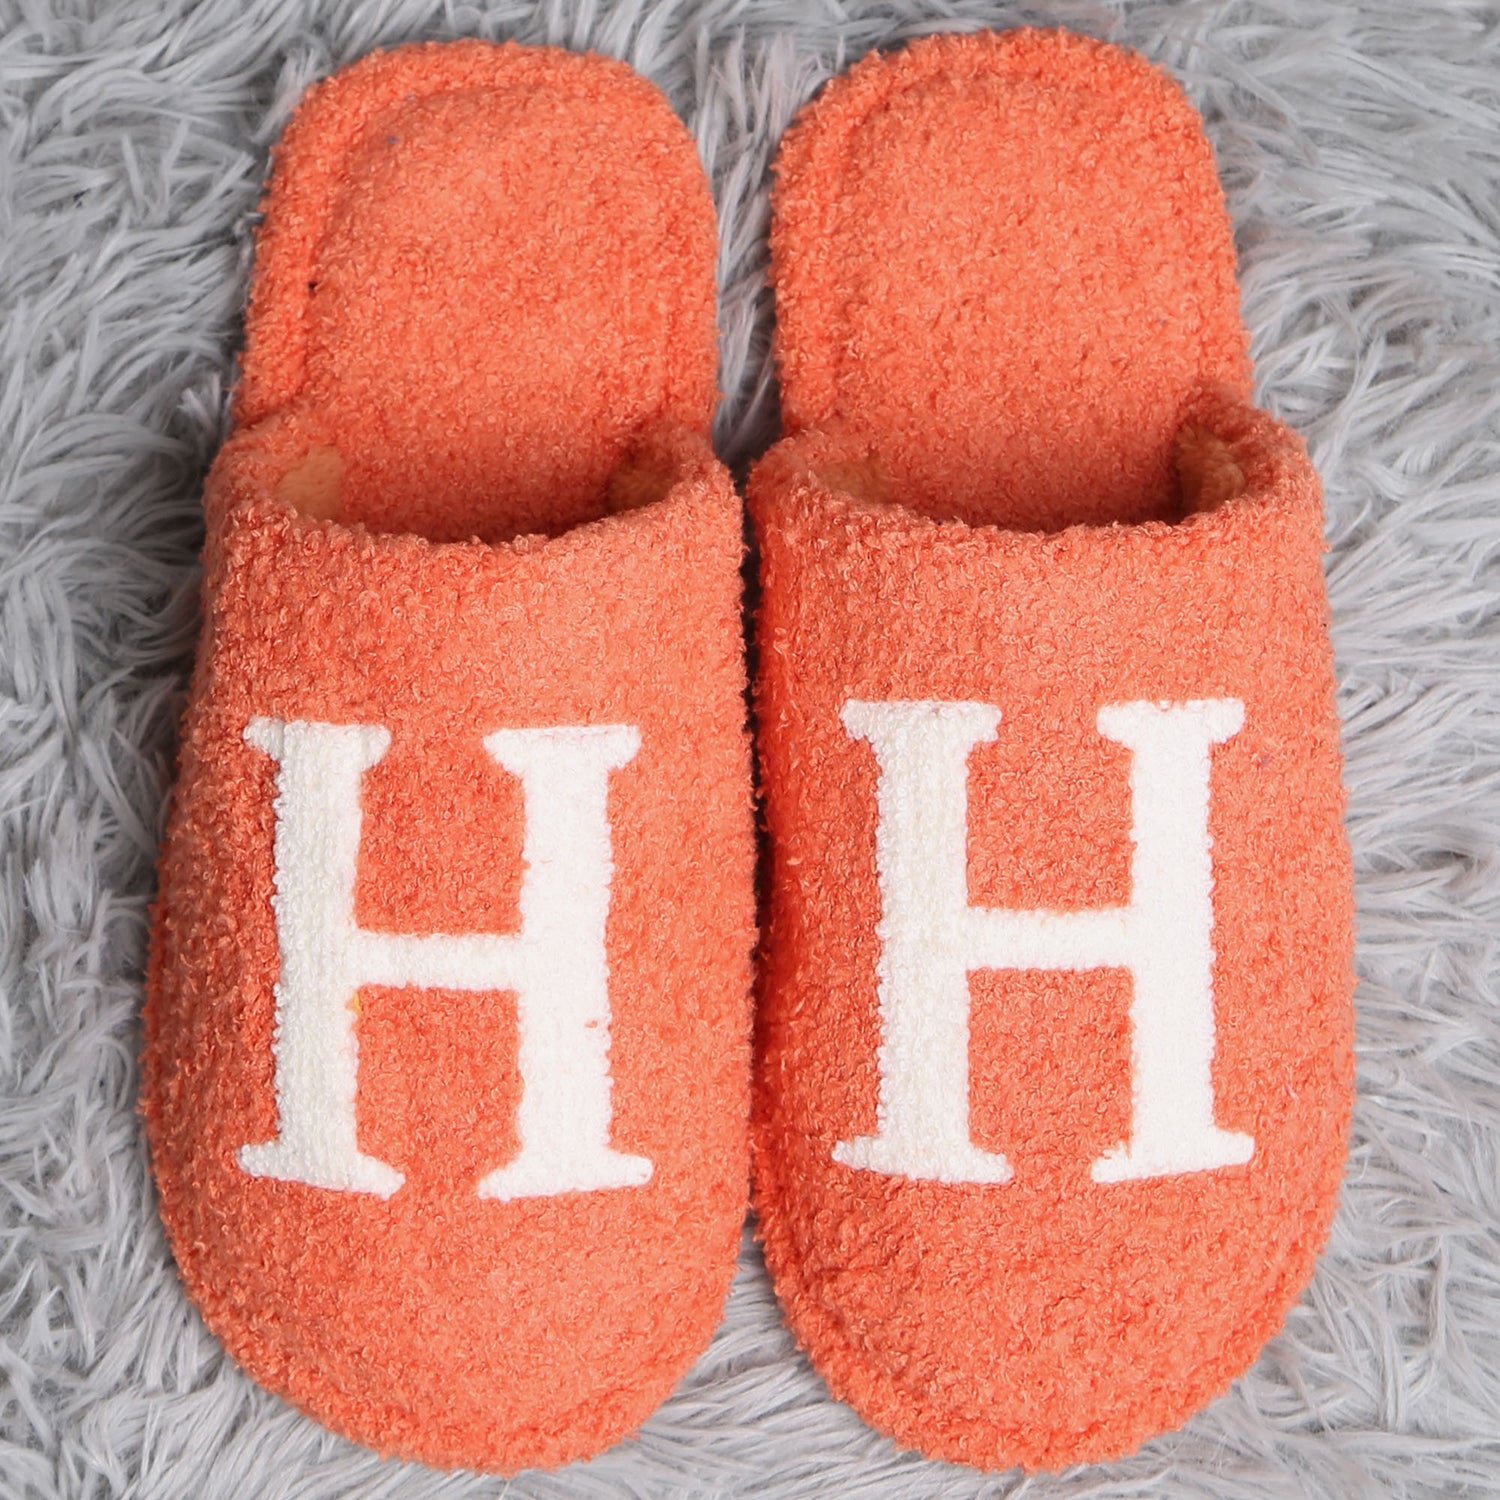 H Slippers